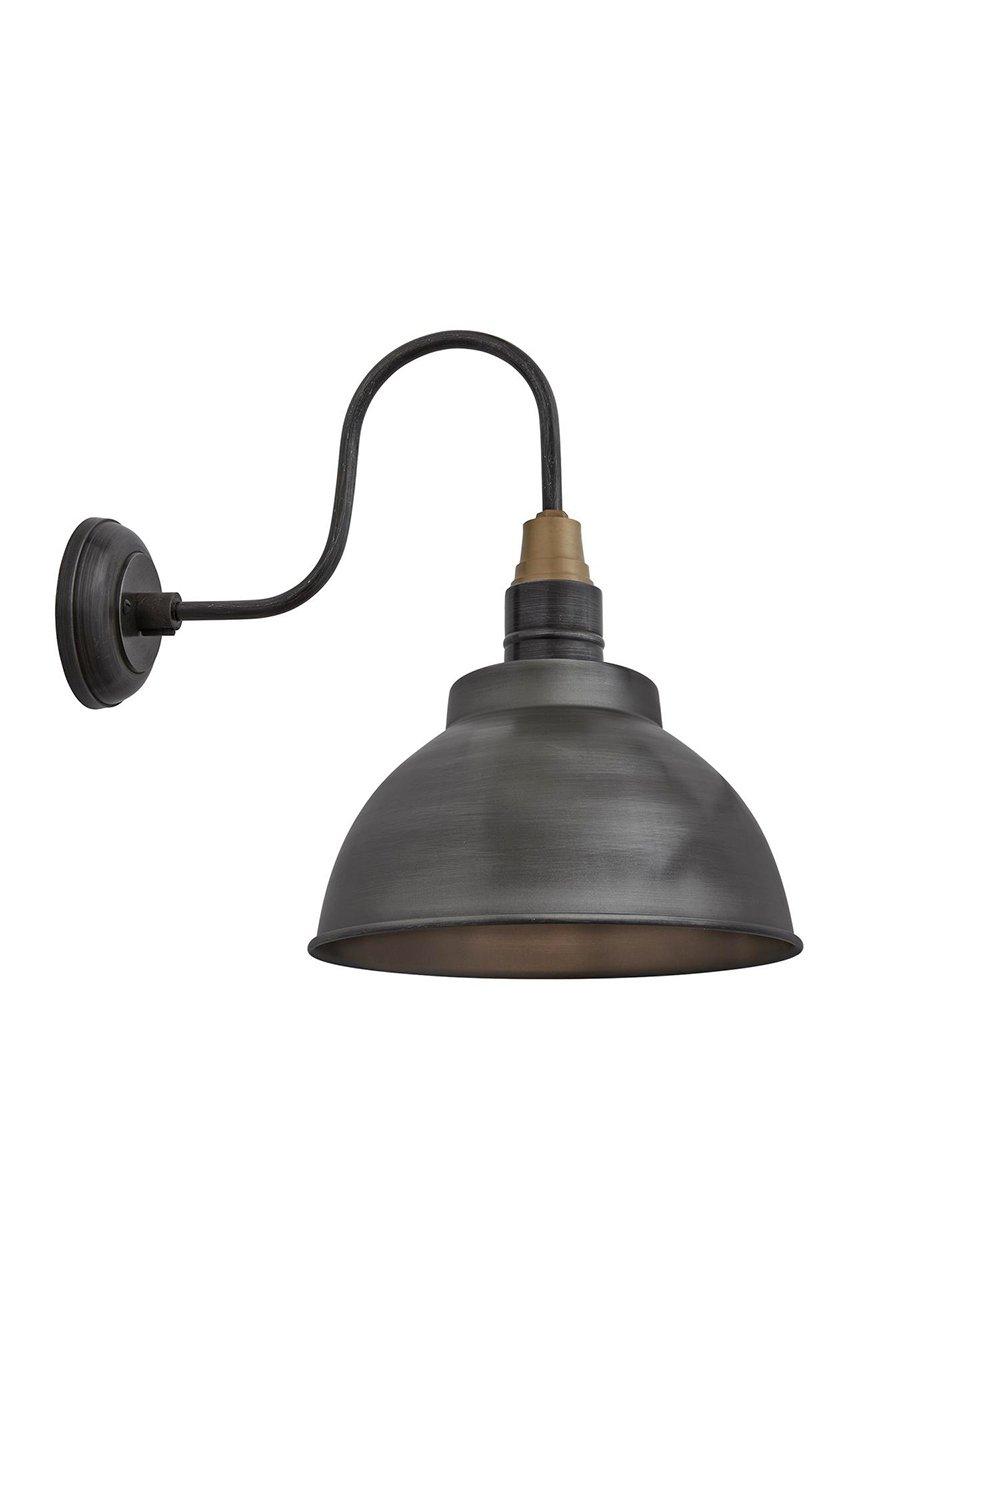 Swan Neck Dome Wall Light, 13 Inch, Pewter, Pewter Holder